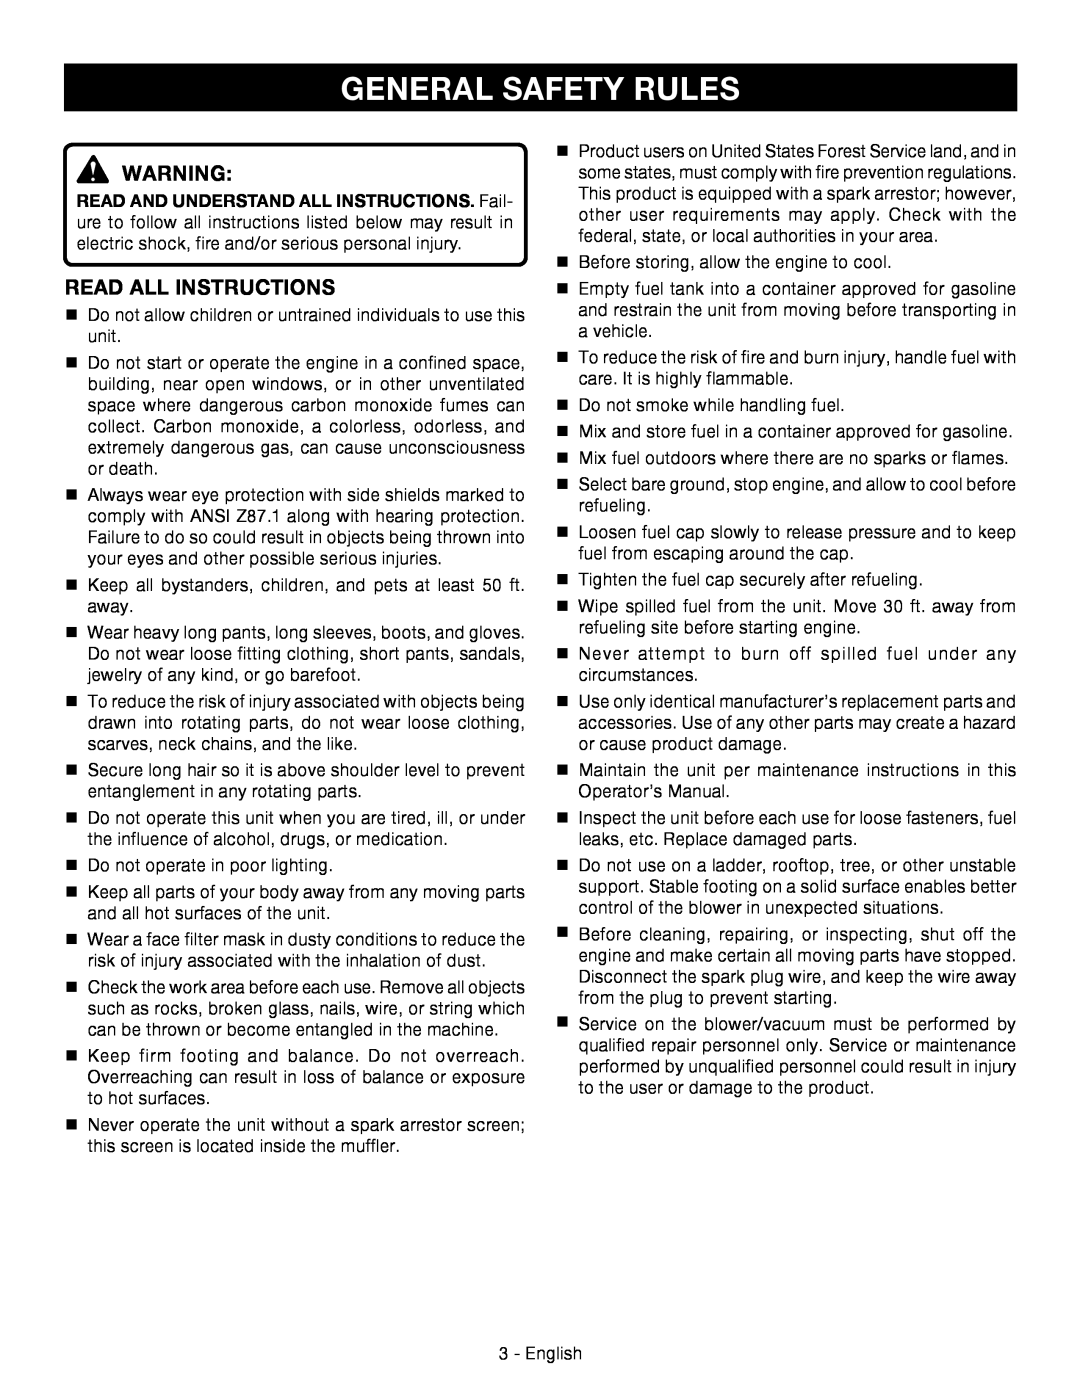 Ryobi RY09056 manuel dutilisation General Safety Rules, read all instructions 